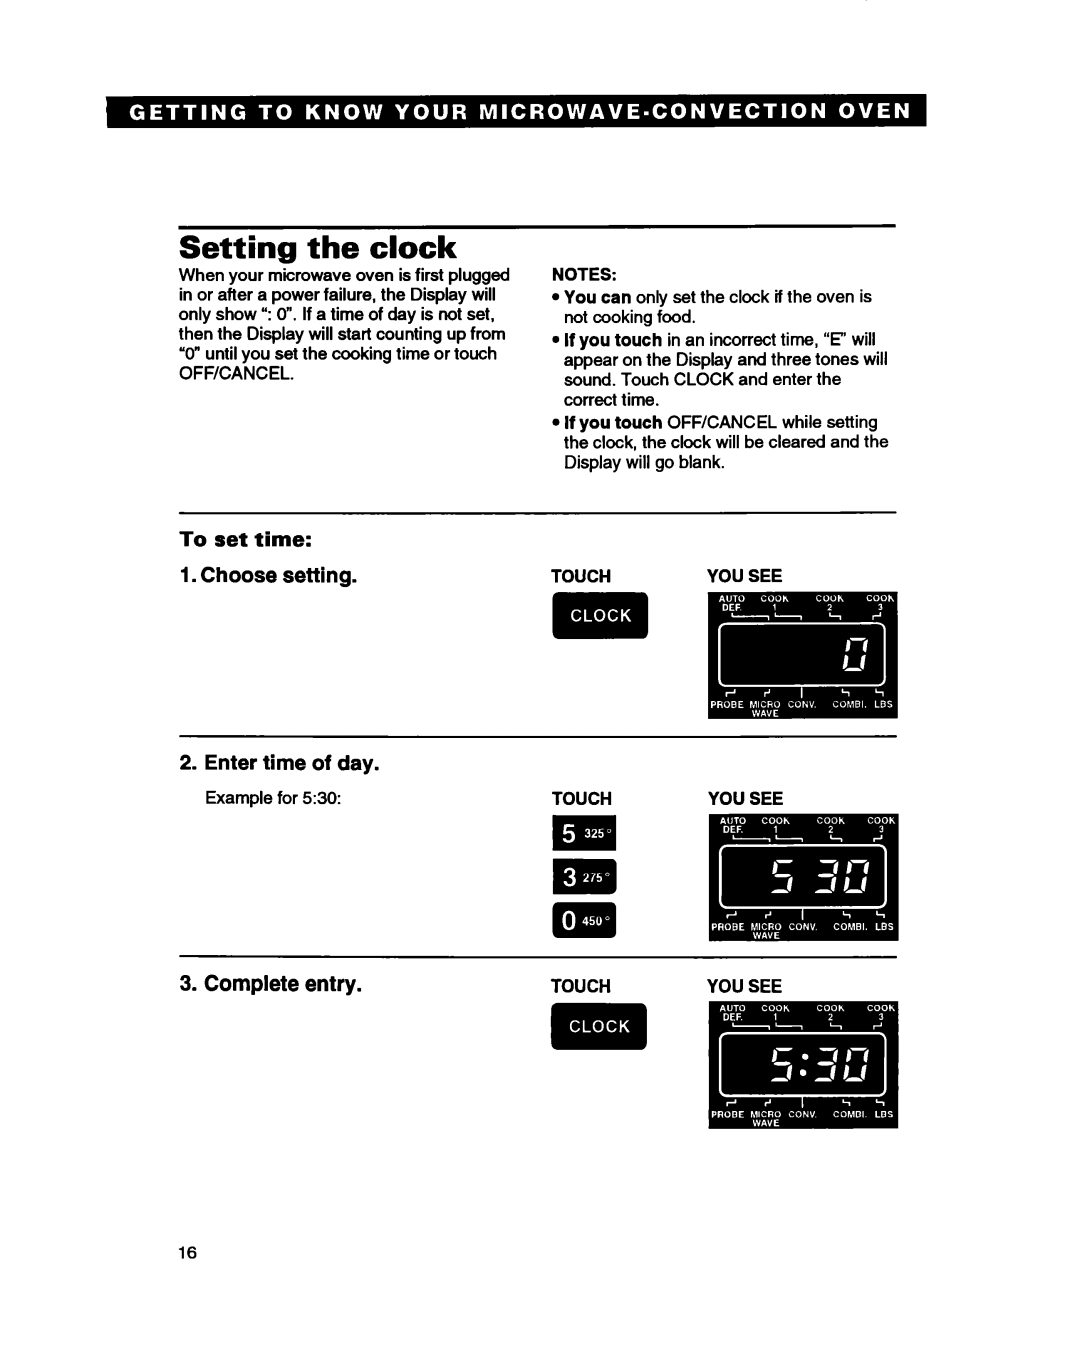 Whirlpool MC8130XA warranty Setting the clock, Choose setting, Enter time of day, Complete entry, To set time, Touch 